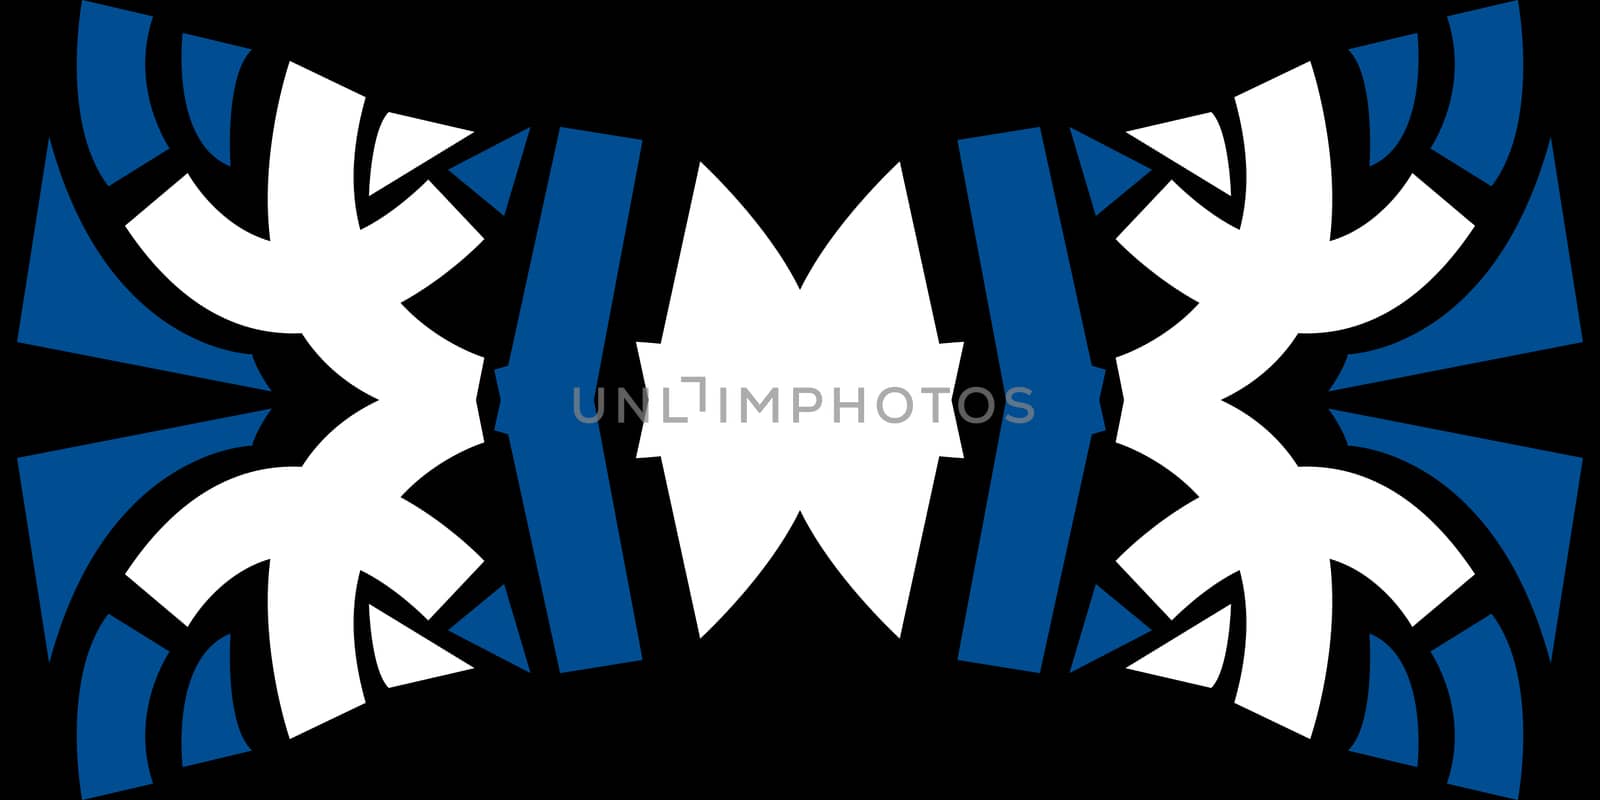 Abstract blue and white bowtie shape pattern over black